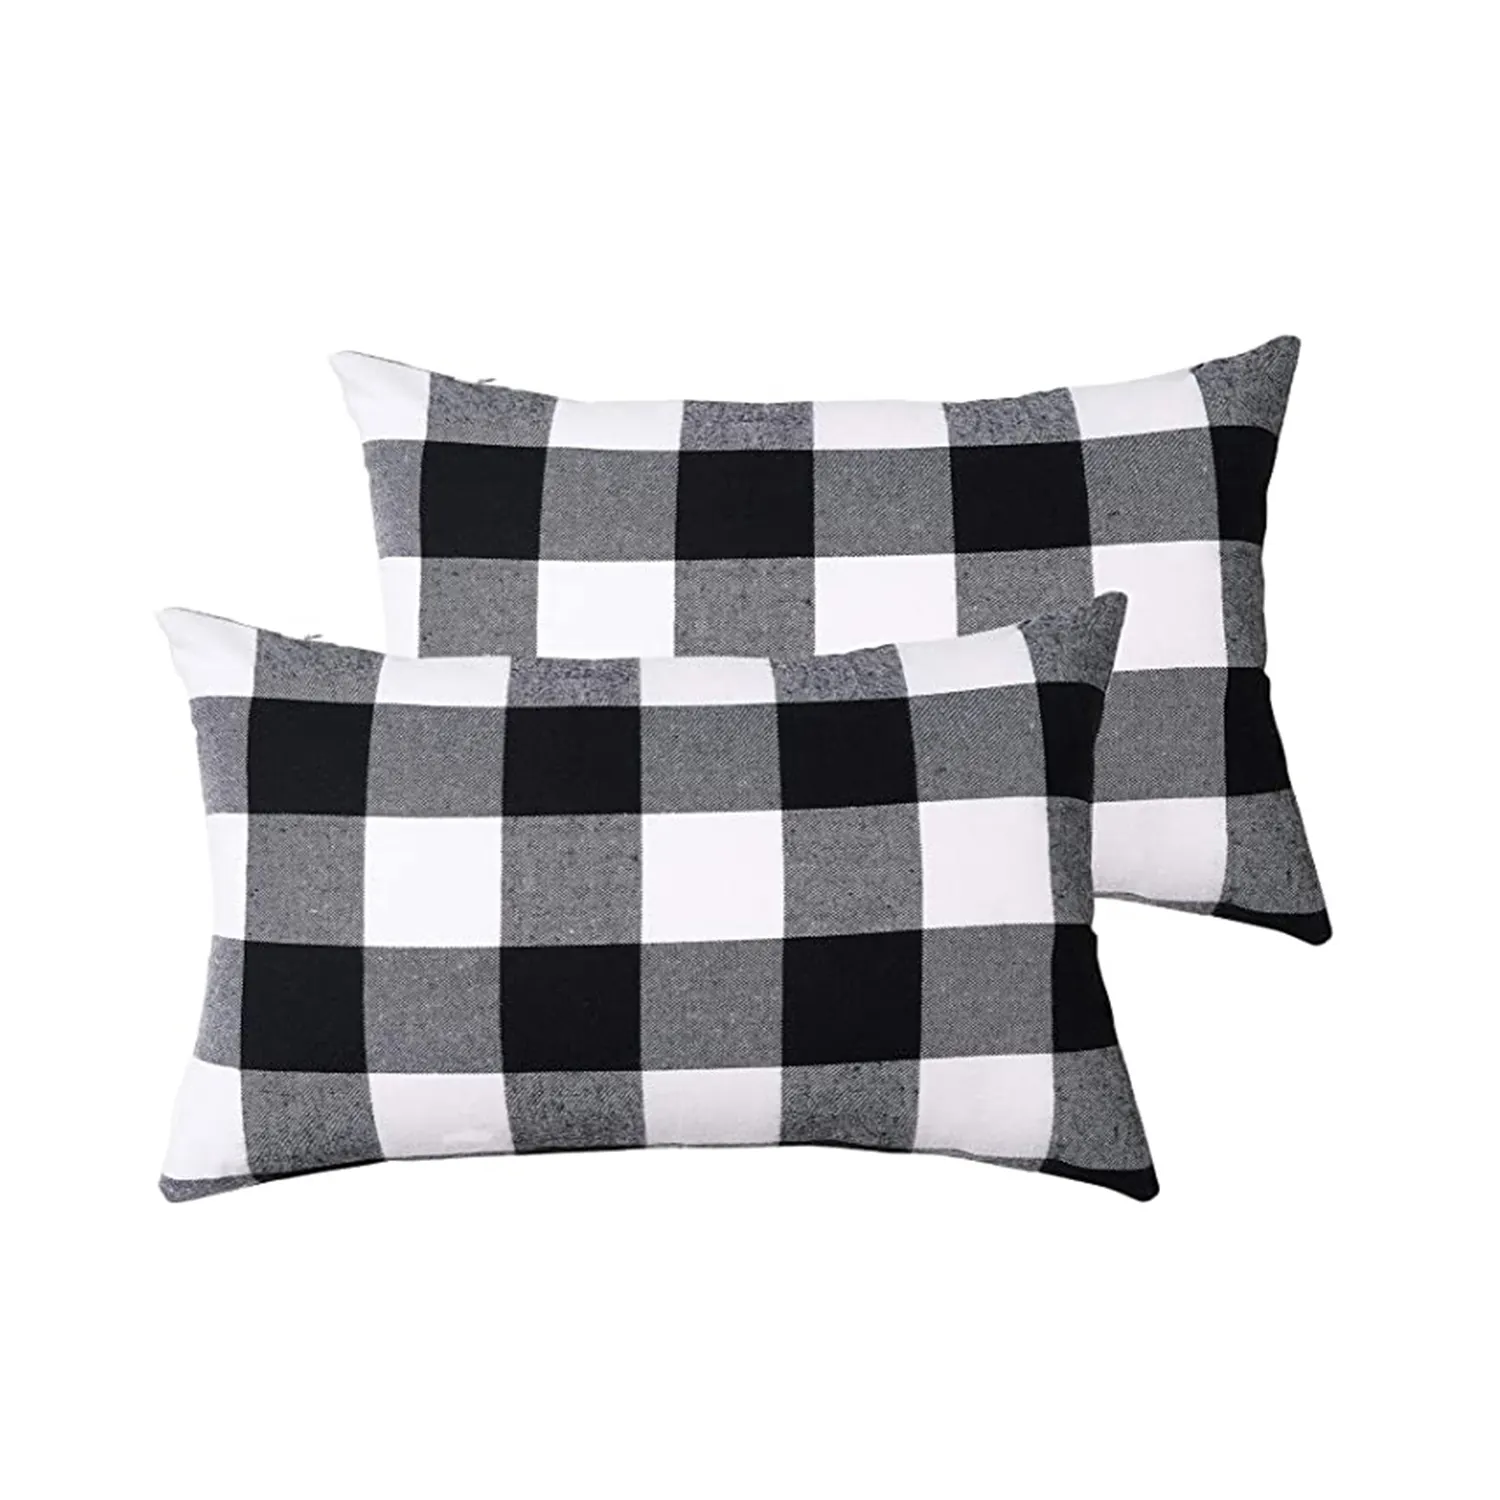 12 x 20 inch Christmas Buffalo Check Plaid Throw Pillow Covers Cushion Case Polyester for Home Decor white and Black